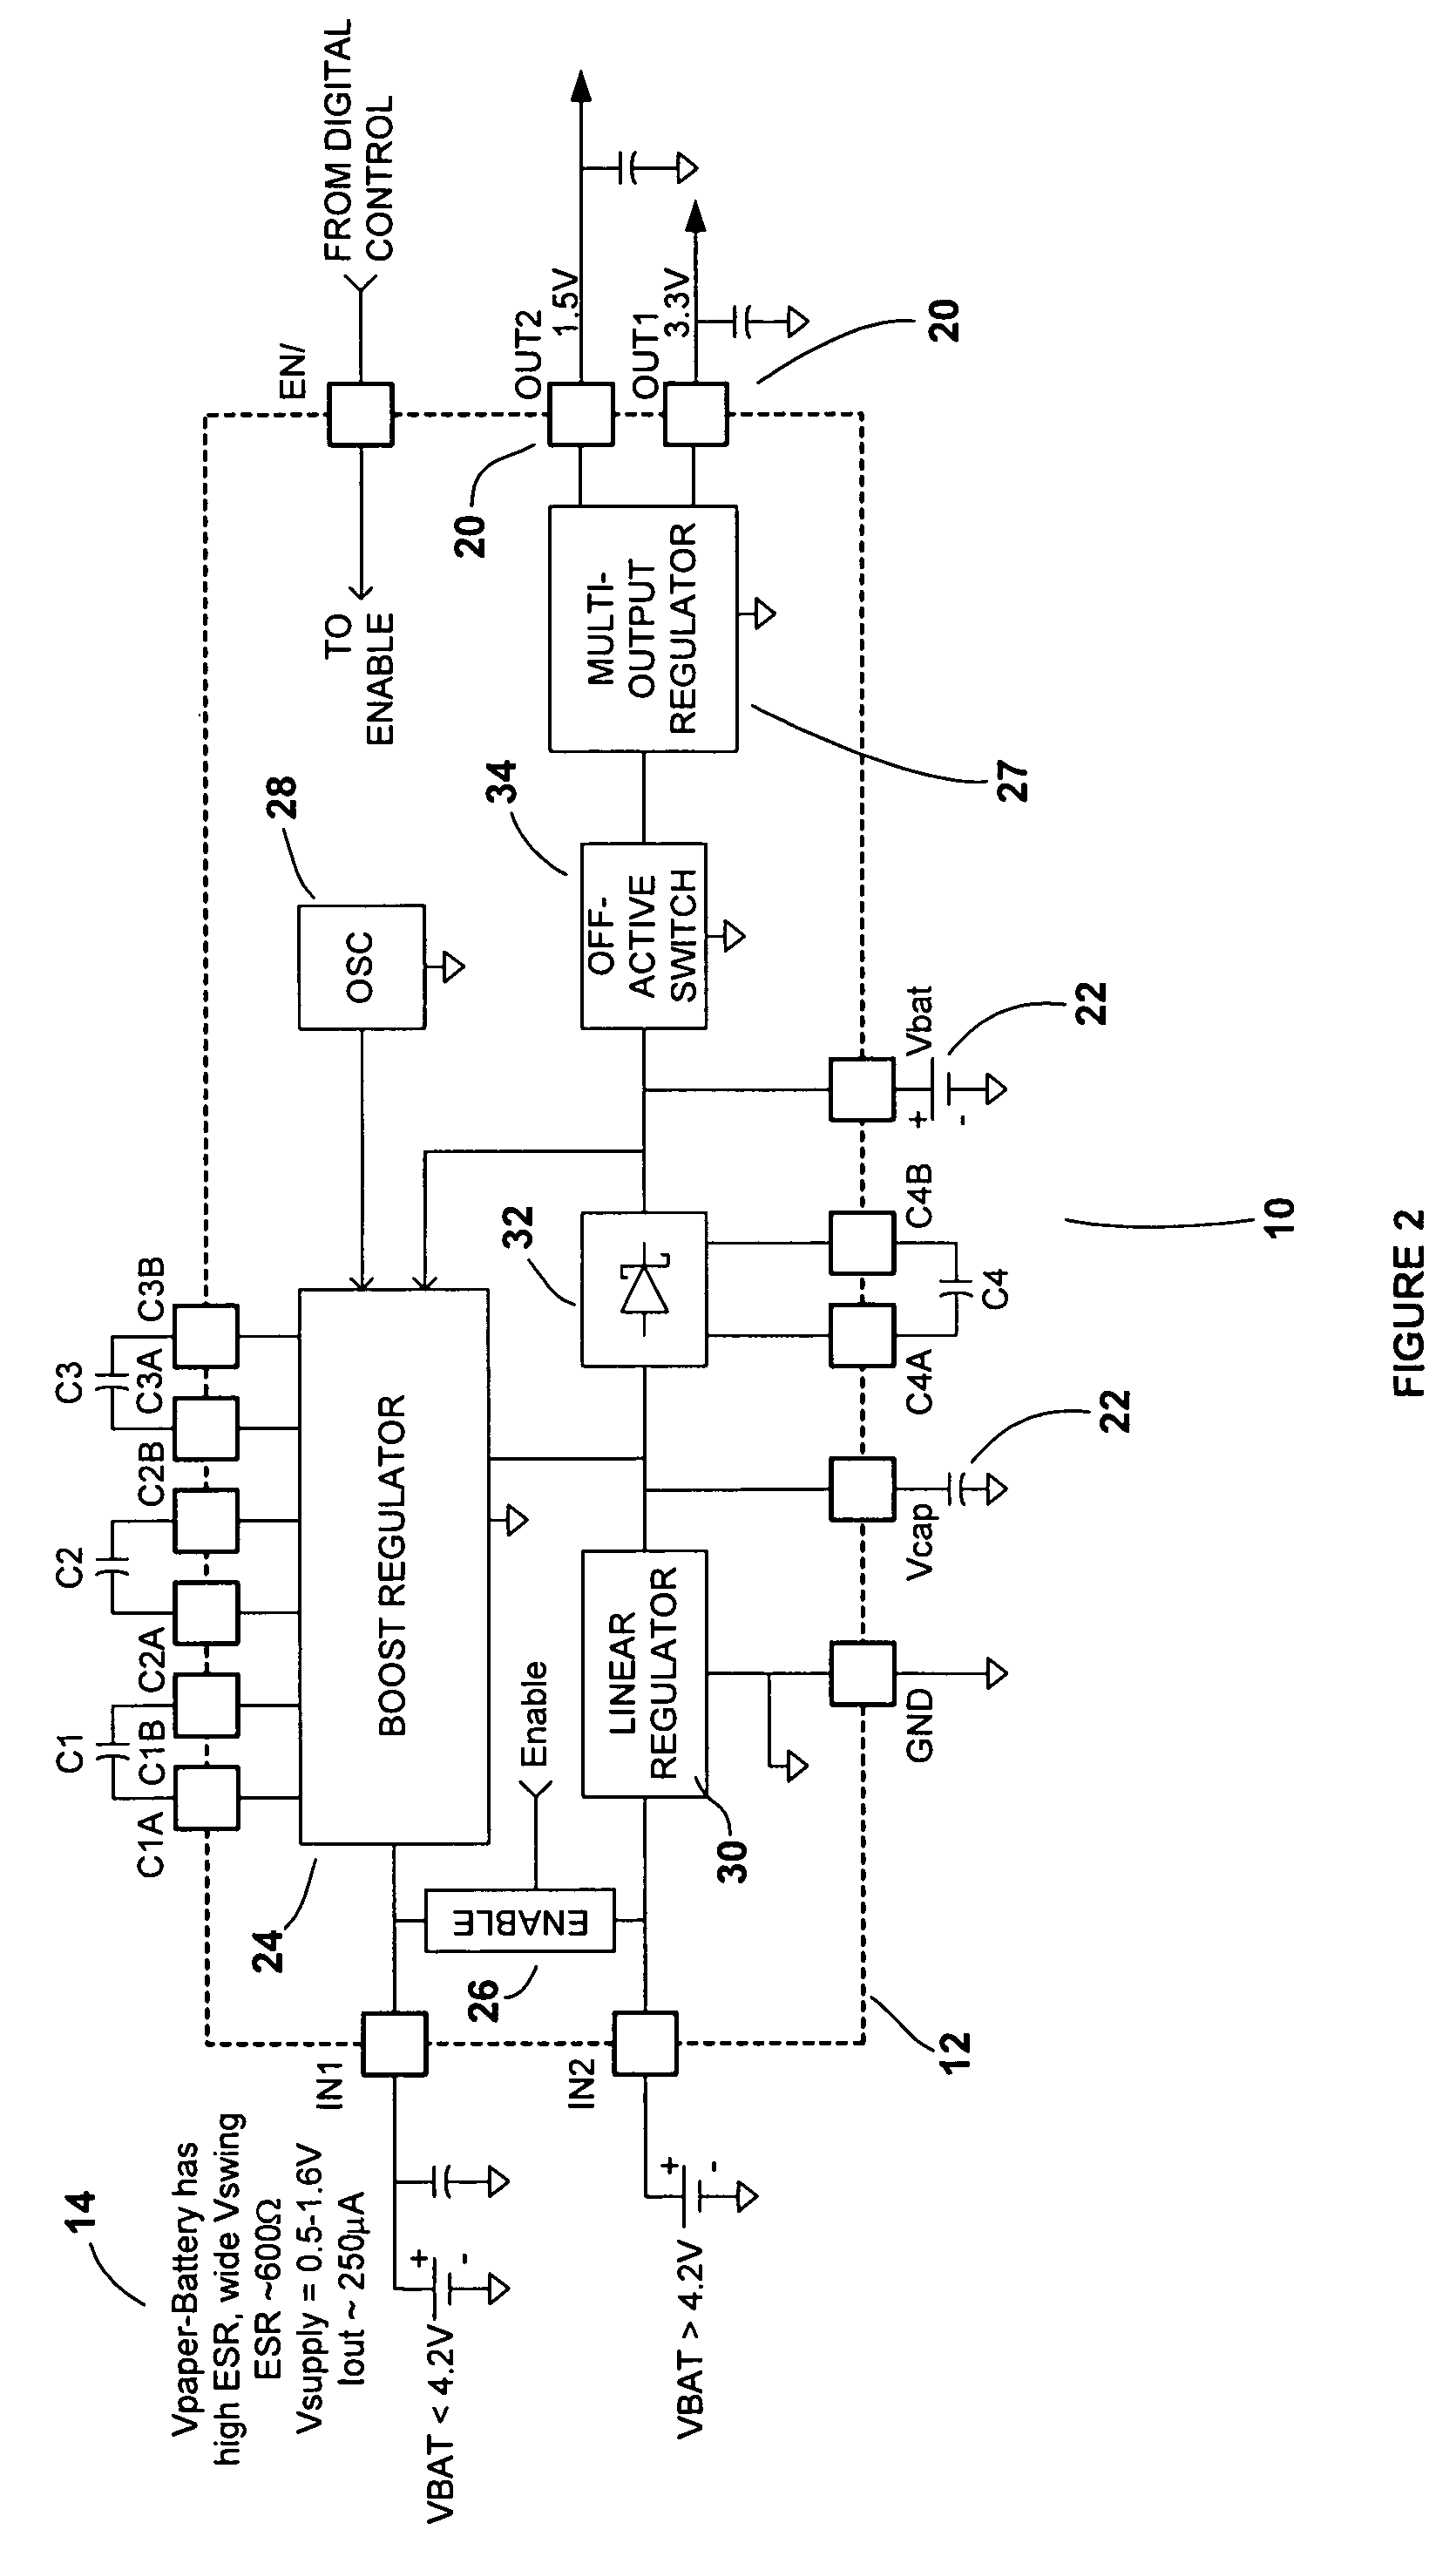 Multile input channel power control circuit